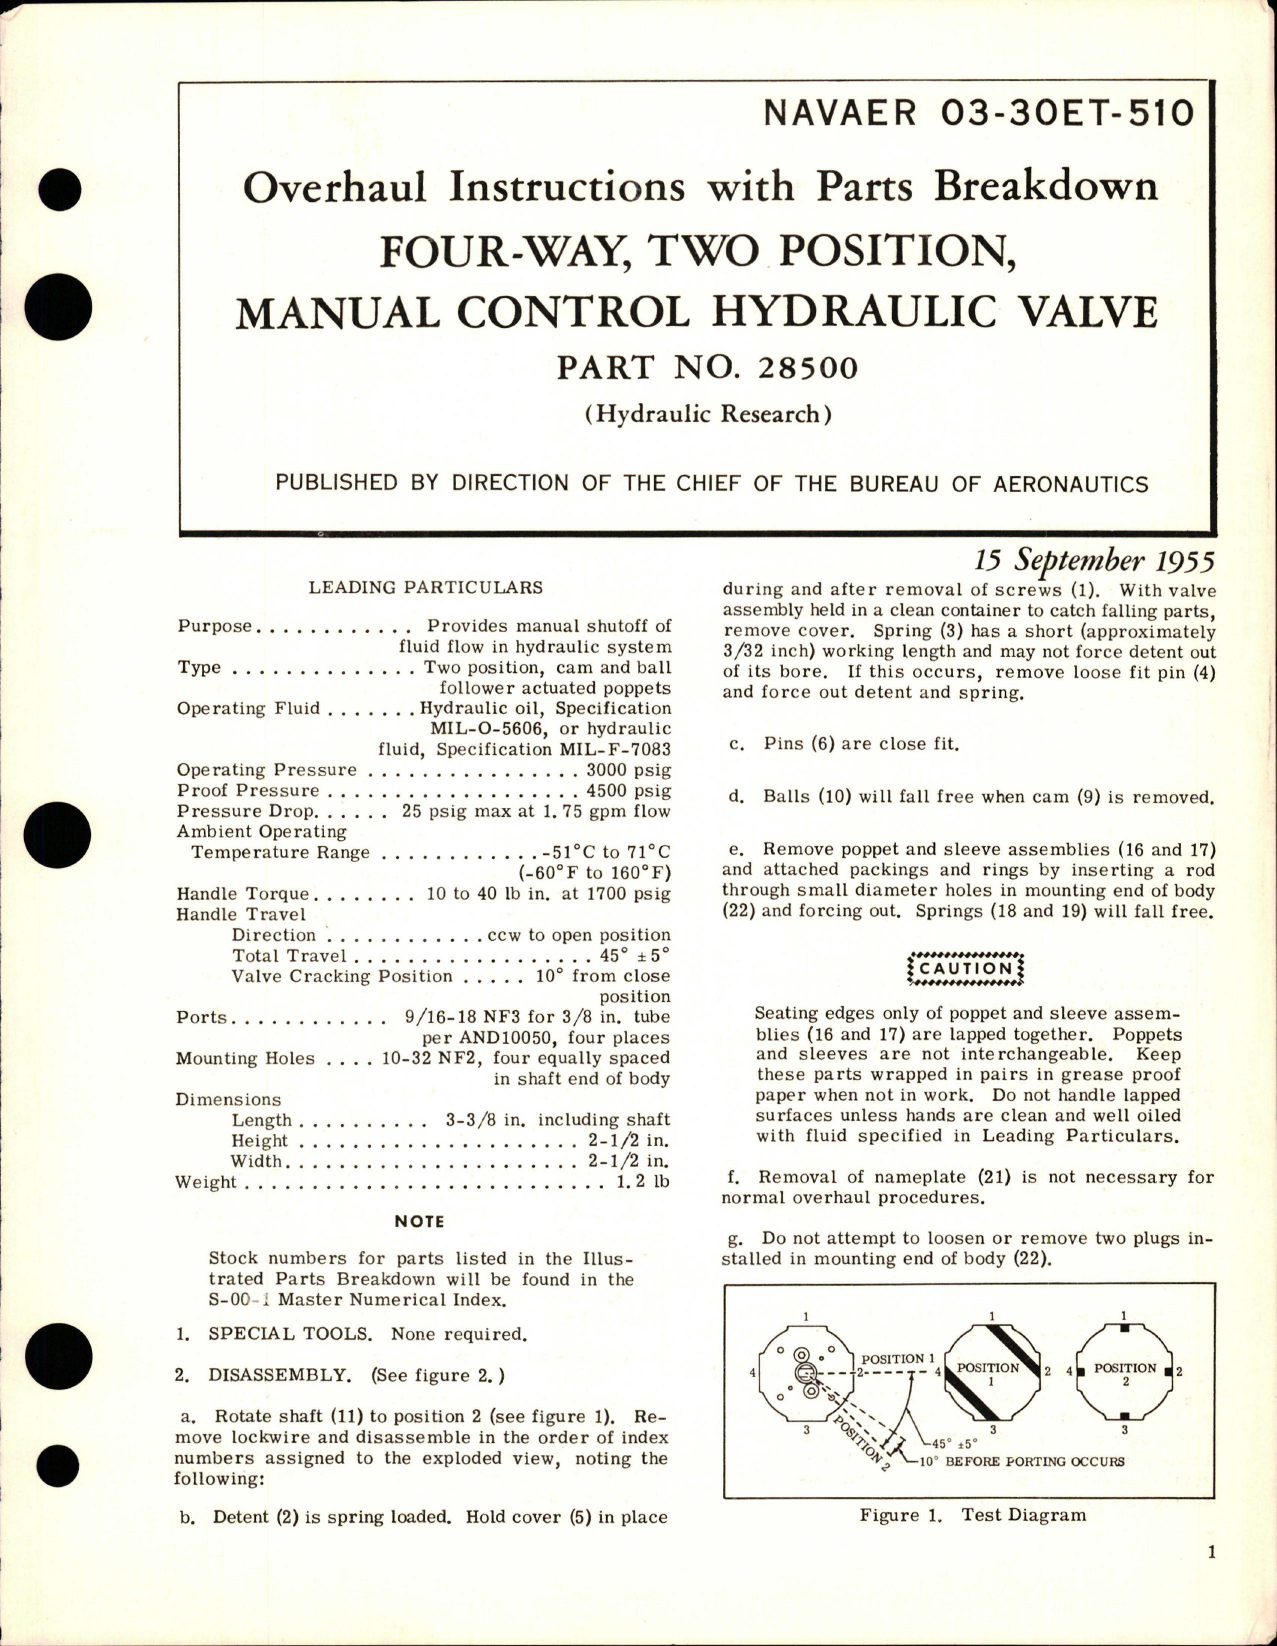 Sample page 1 from AirCorps Library document: Overhaul Instructions with Parts Breakdown for Four-Way, Two-Position, Manual Control Hydraulic Valve - Part 28500